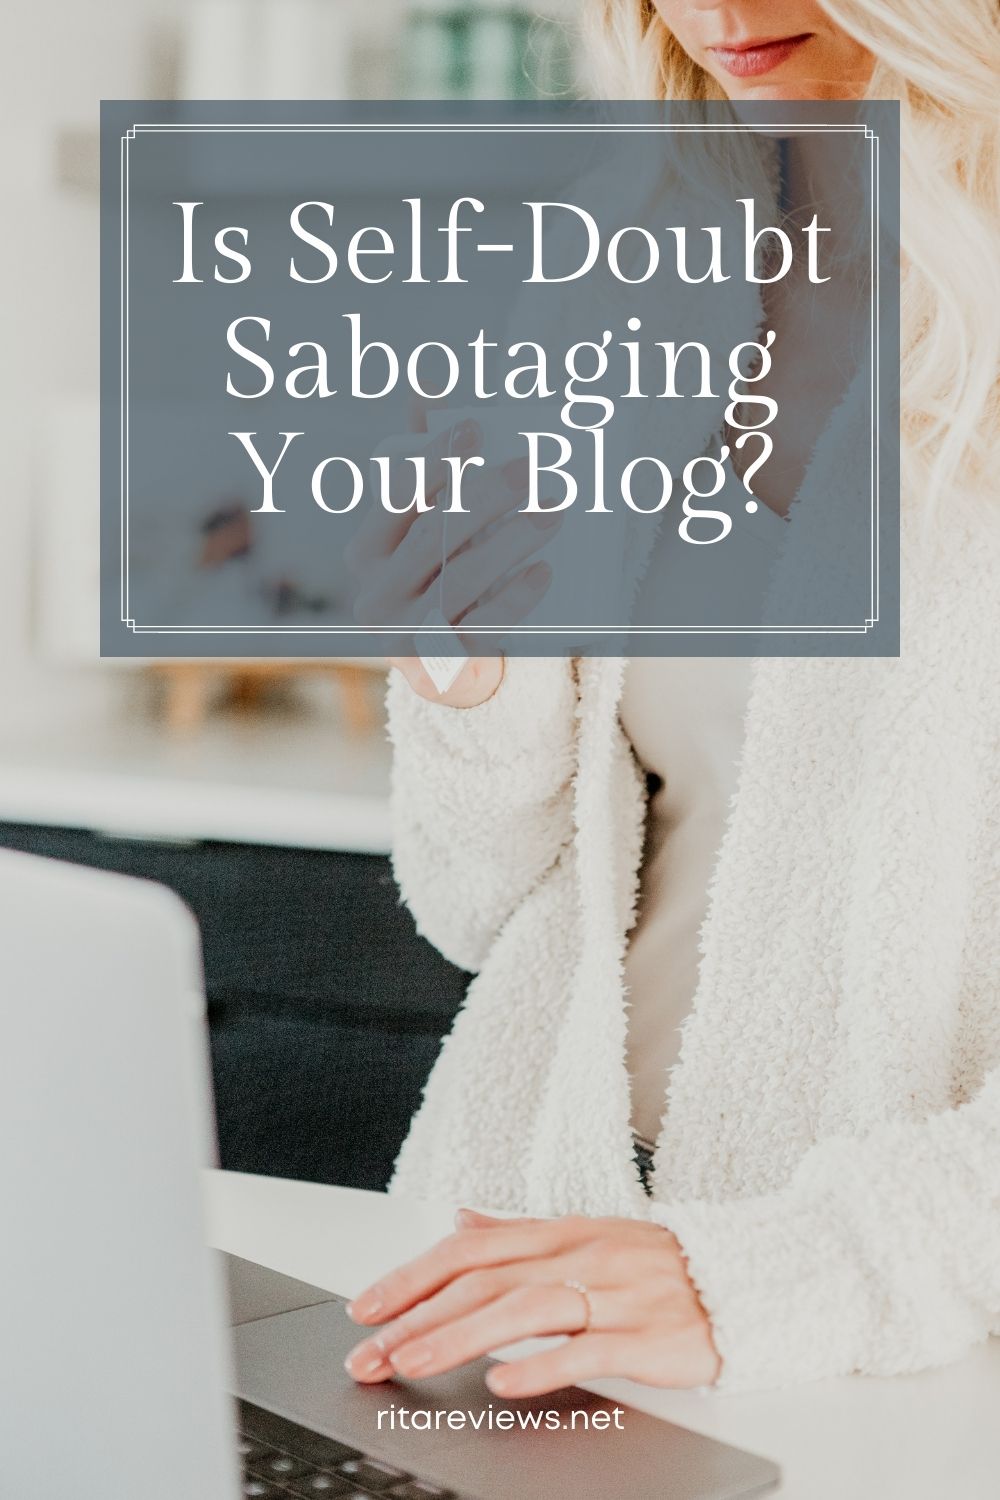 Is Self-Doubt Sabotaging Your Blog